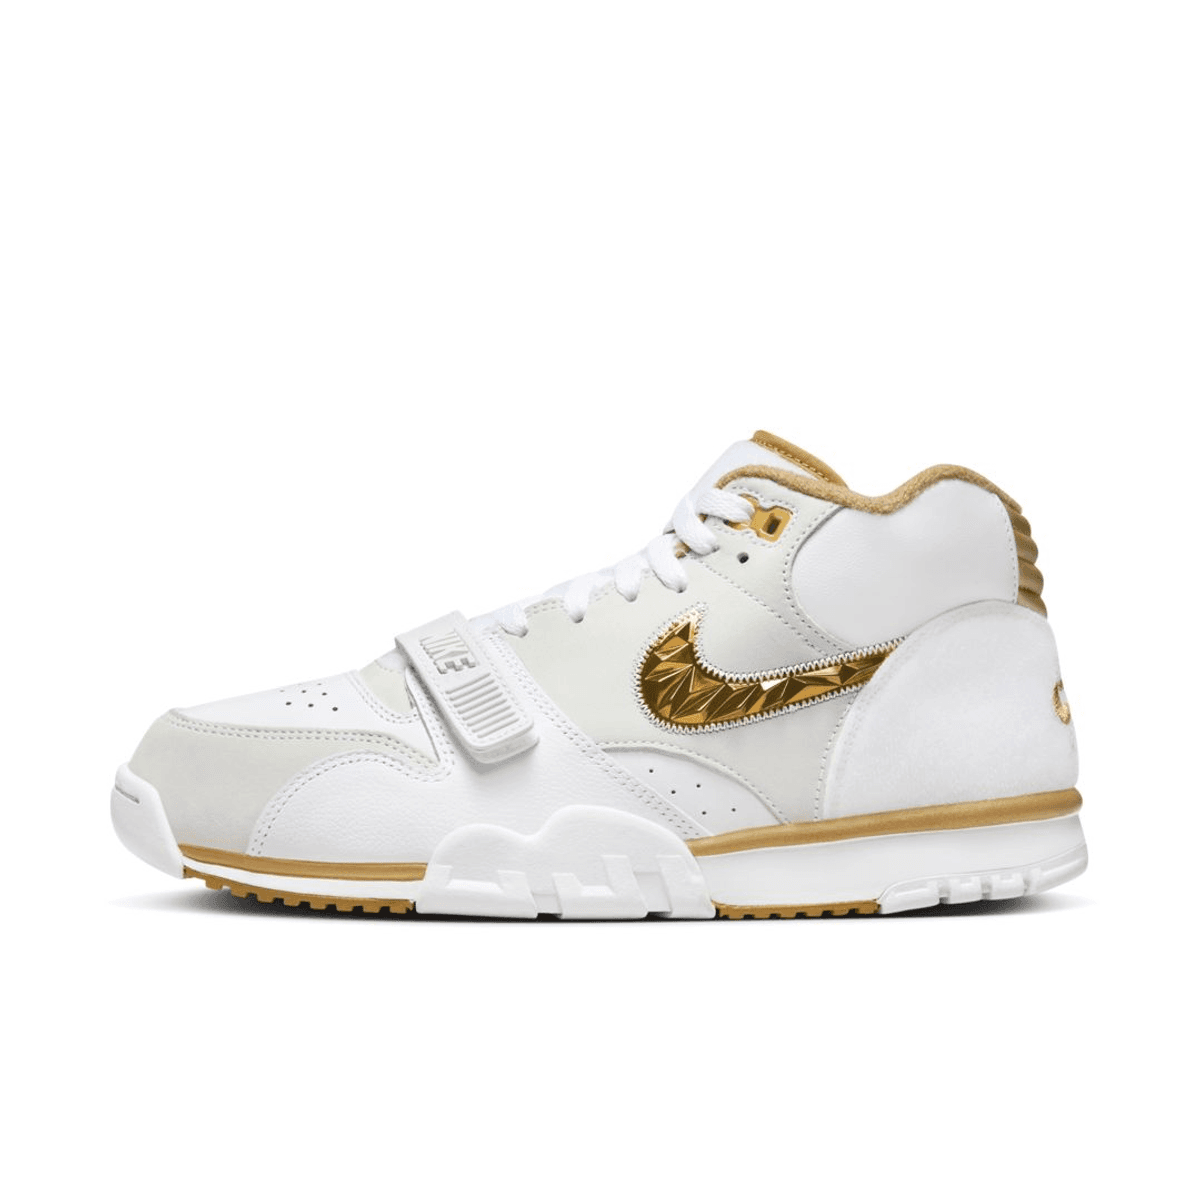 Official Look At The Nike Air Trainer 1 "College Football Playoffs" White Gold